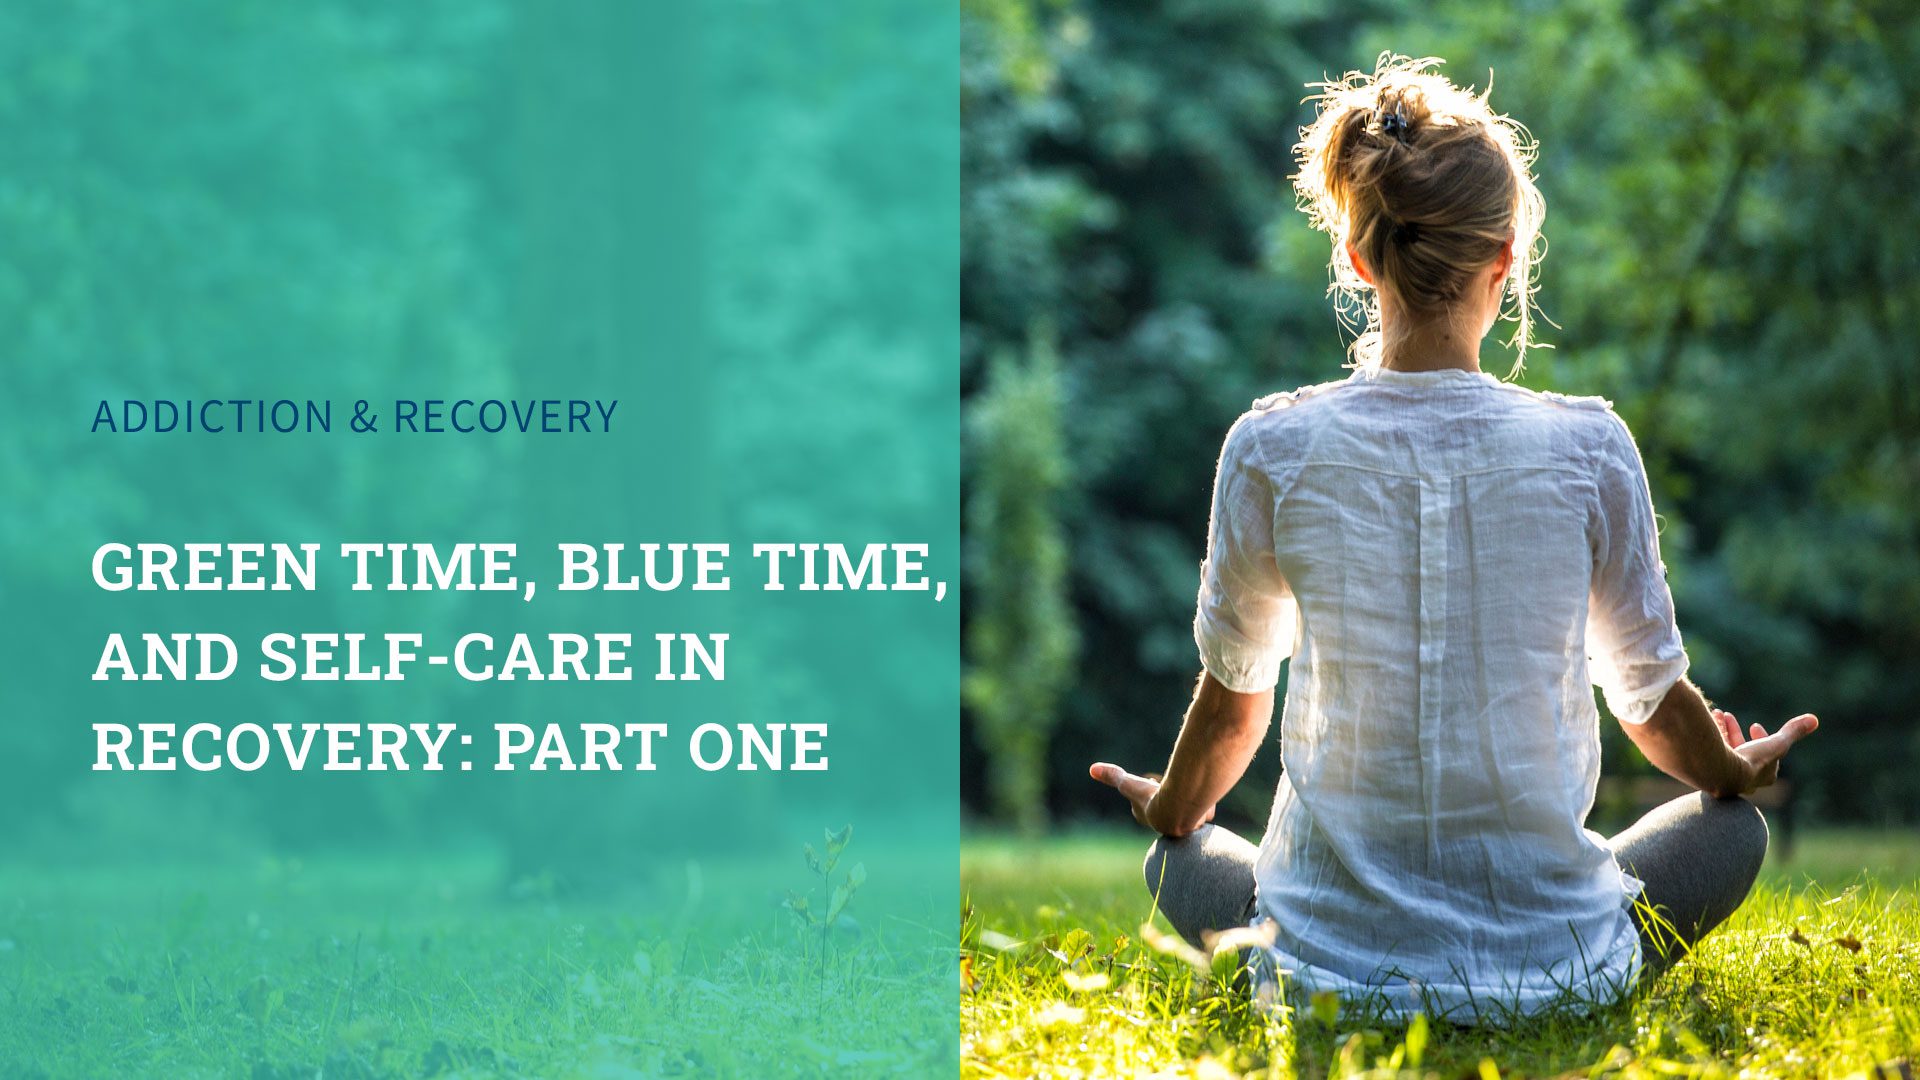 Green Time, Blue Time, and Self-Care During Recovery: Part One